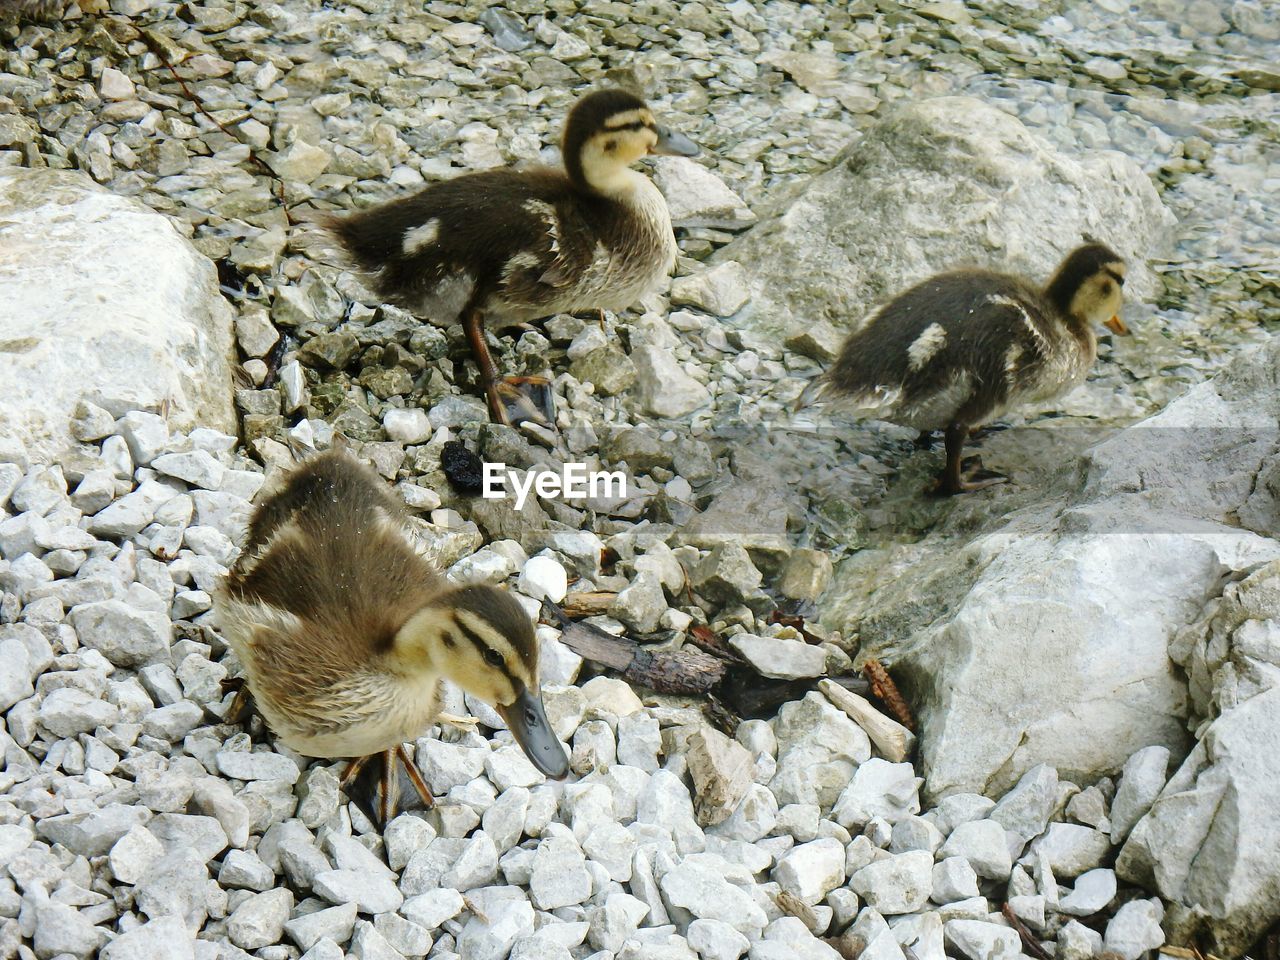 HIGH ANGLE VIEW OF DUCKLINGS IN WATER